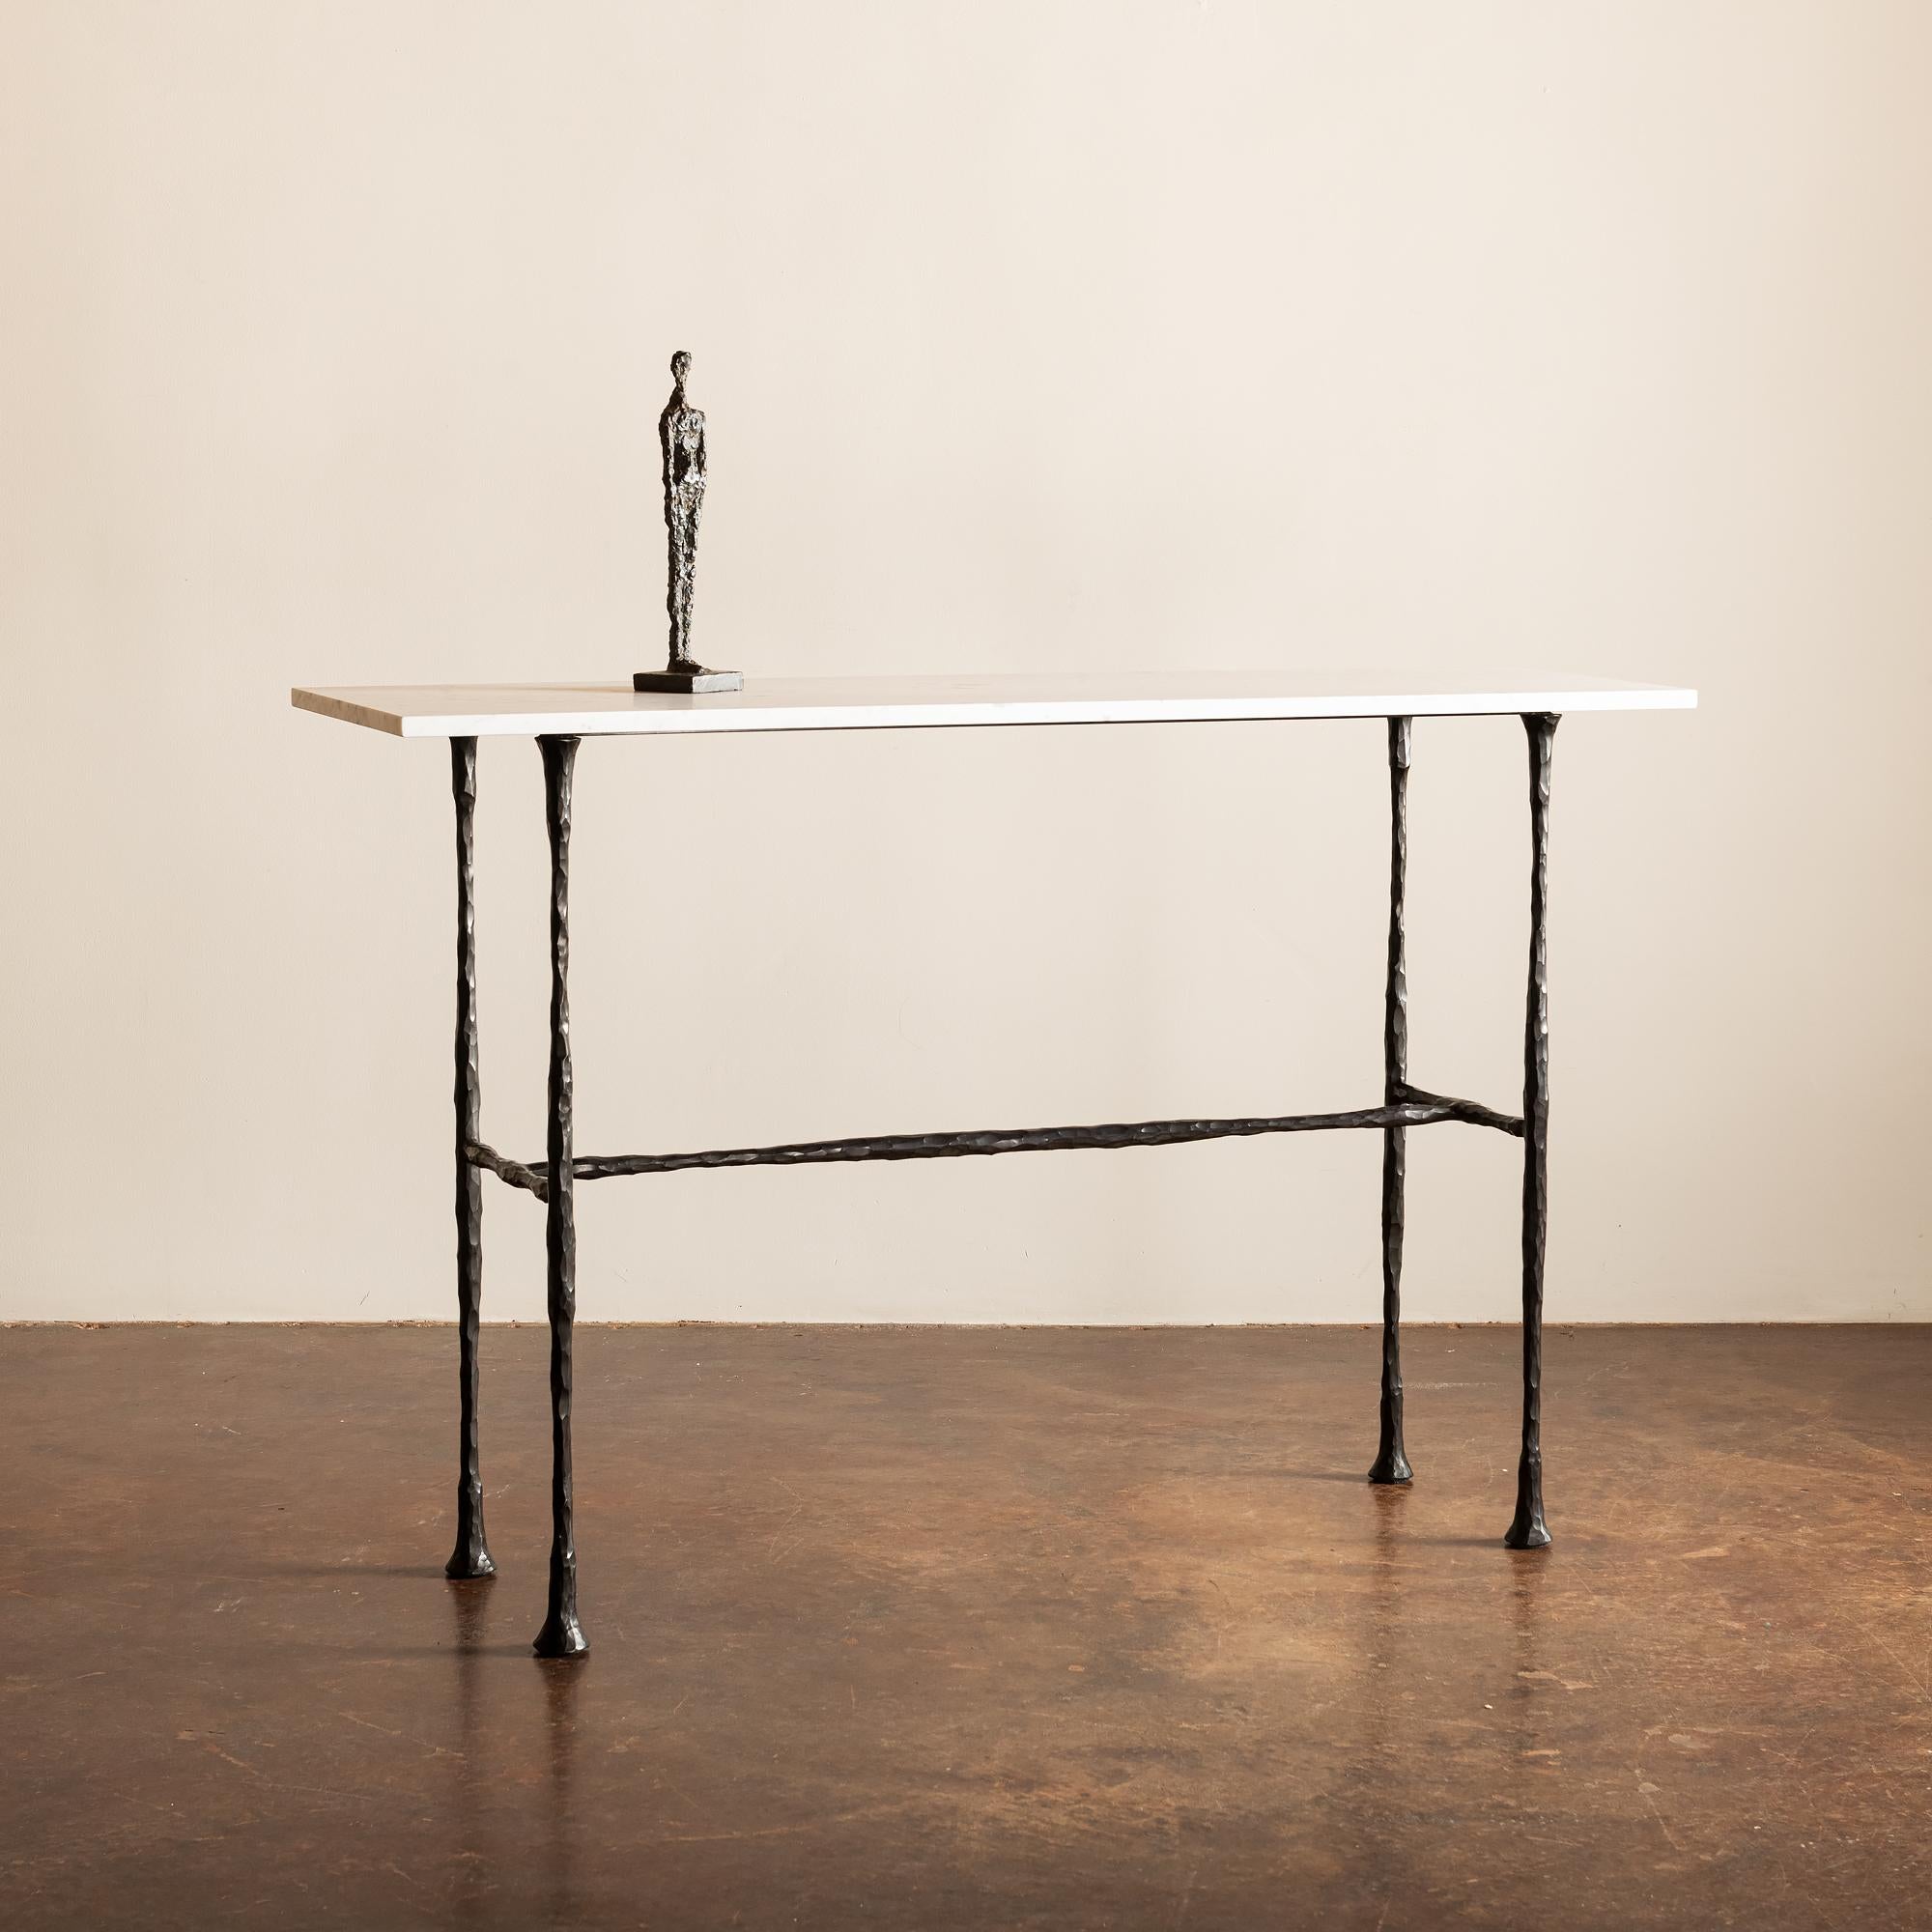 The DA Console table is inspired by the work of Diego and Alberto Giacometti and is executed in blackened bronze and Carrara marble. This piece is a collaboration between Lauren Hunt and Caleb Kullman, a talented blacksmith based in Santa Fe, NM.